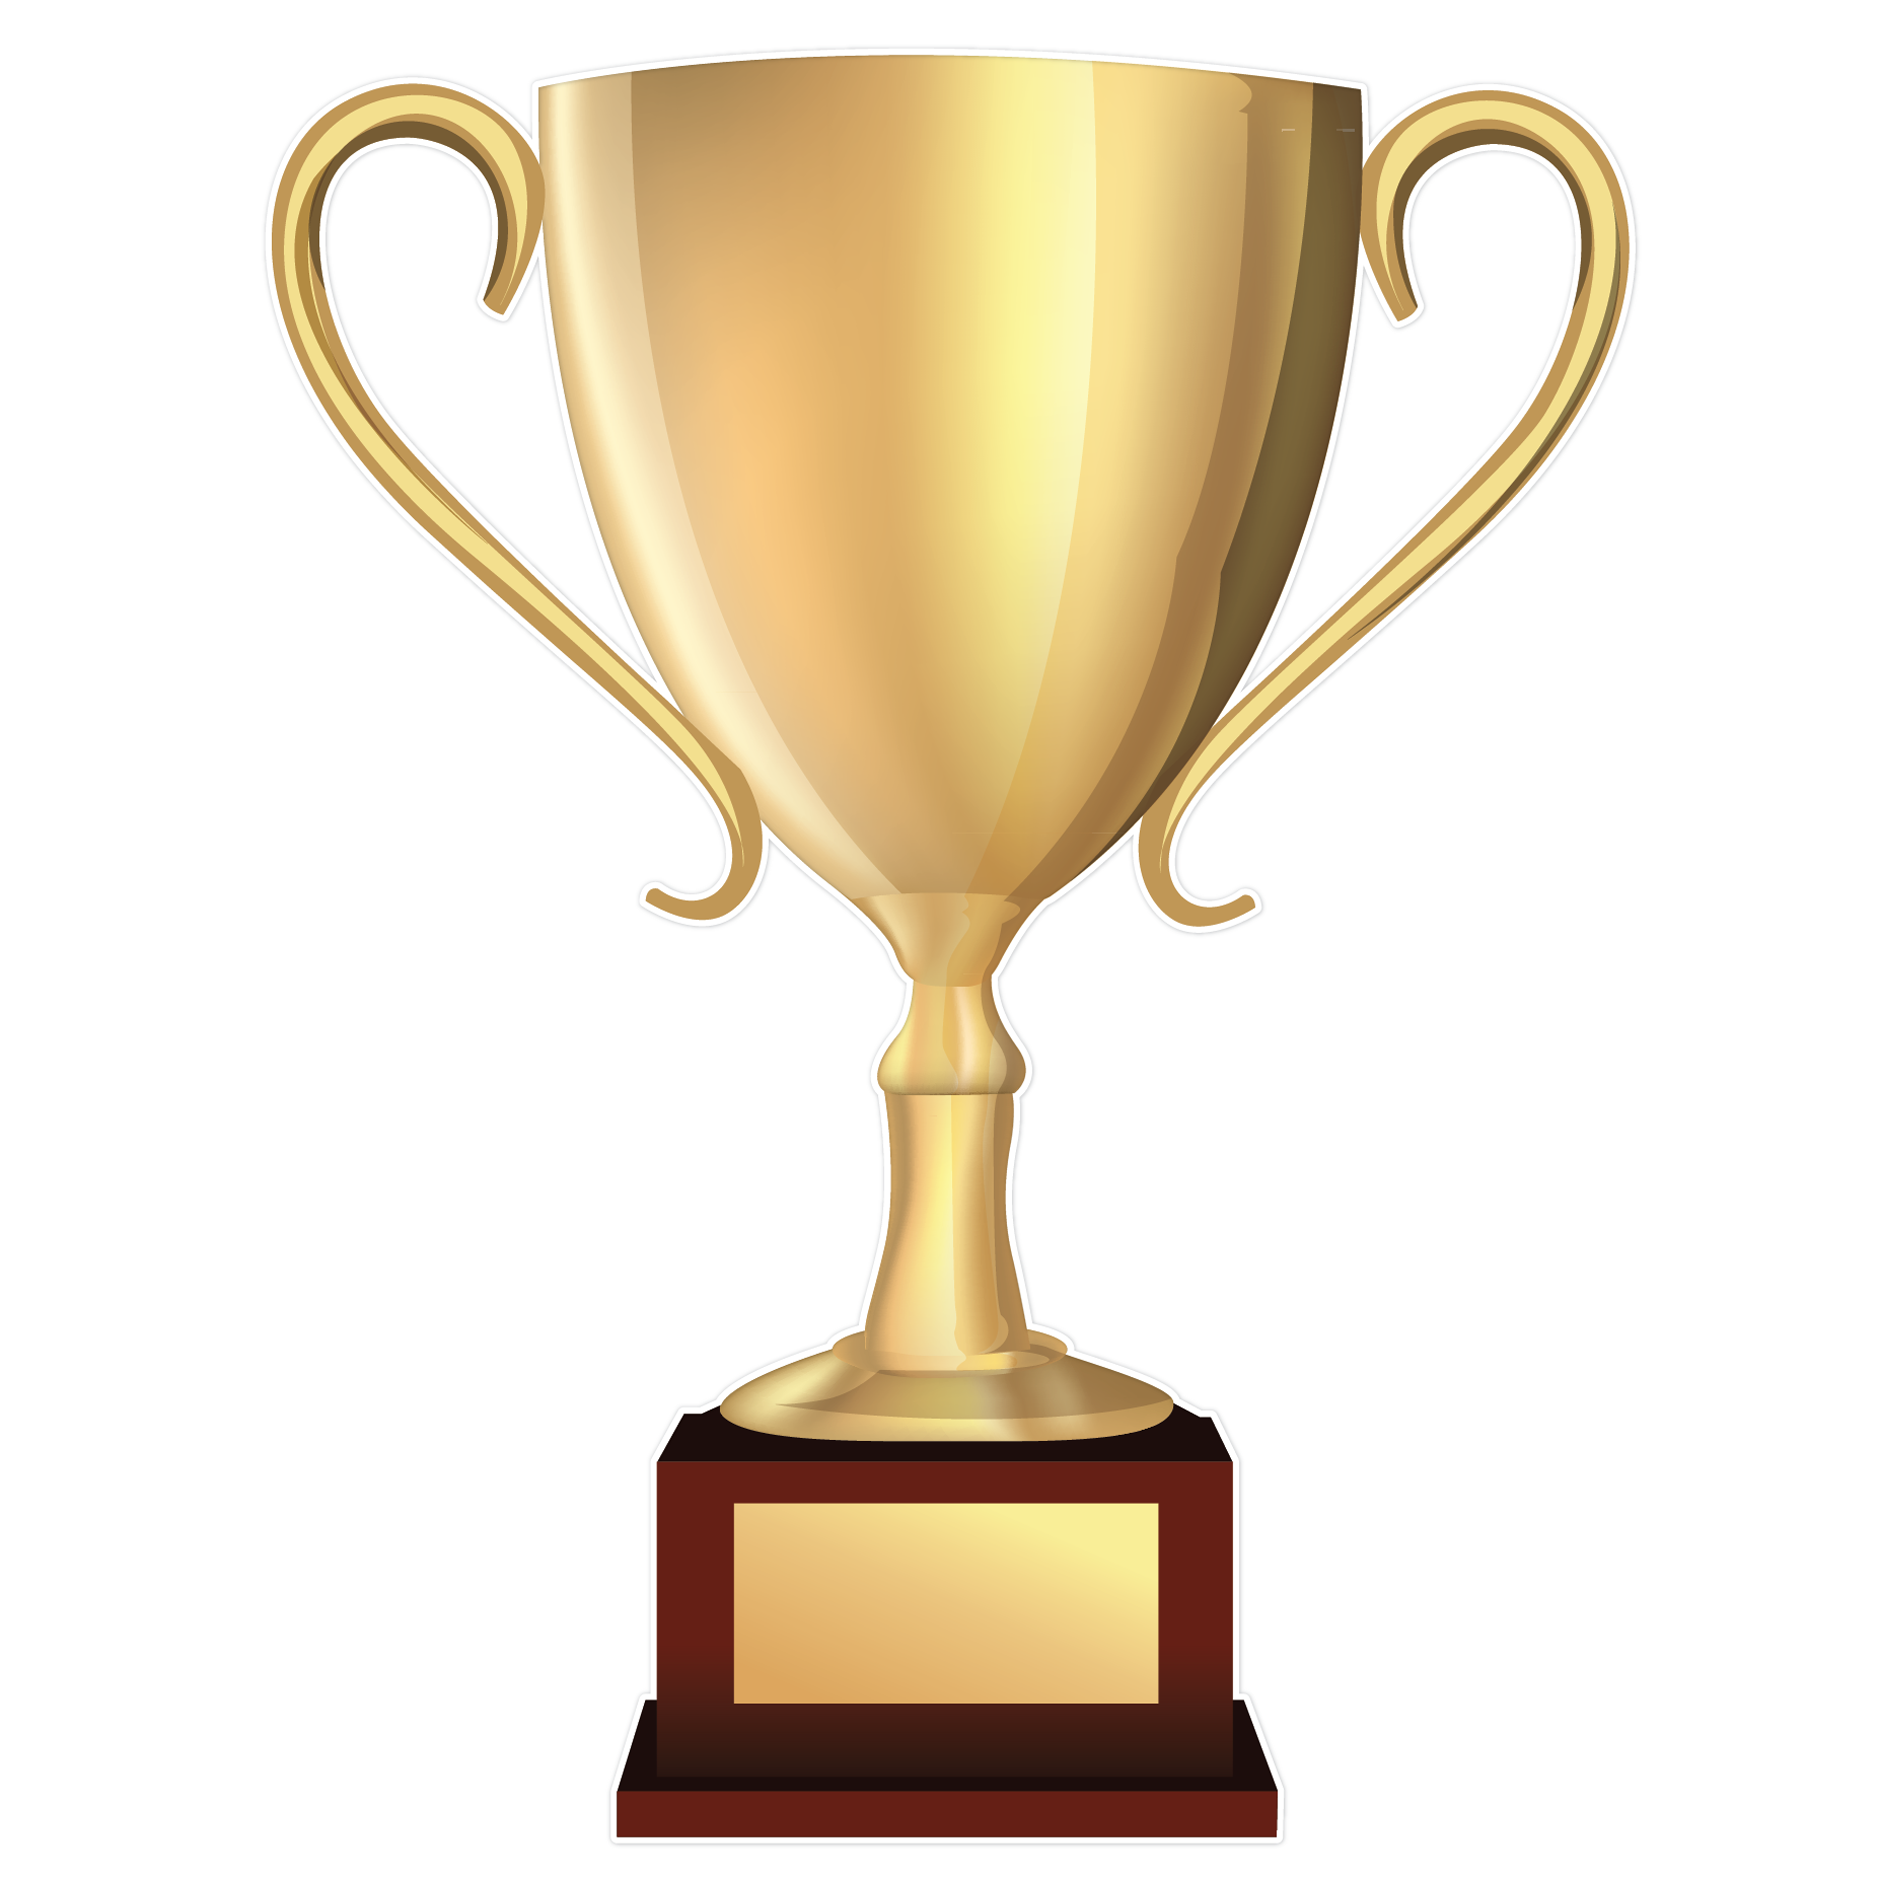 football trophy clipart free - photo #45